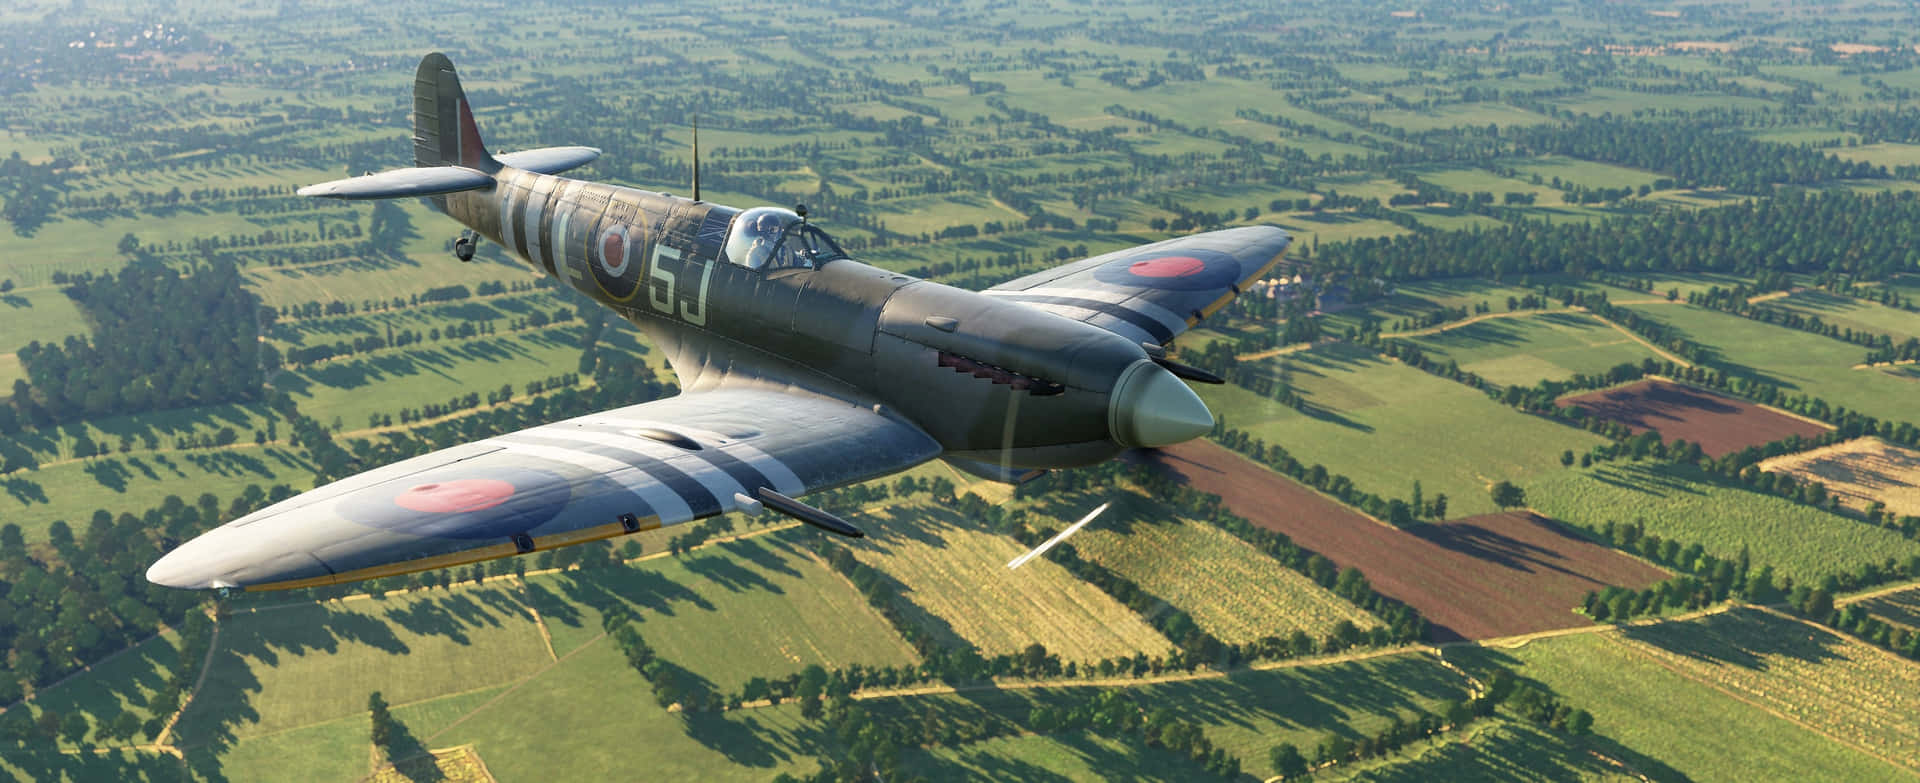 A Vintage Fighter Plane Flying Over A Field Wallpaper